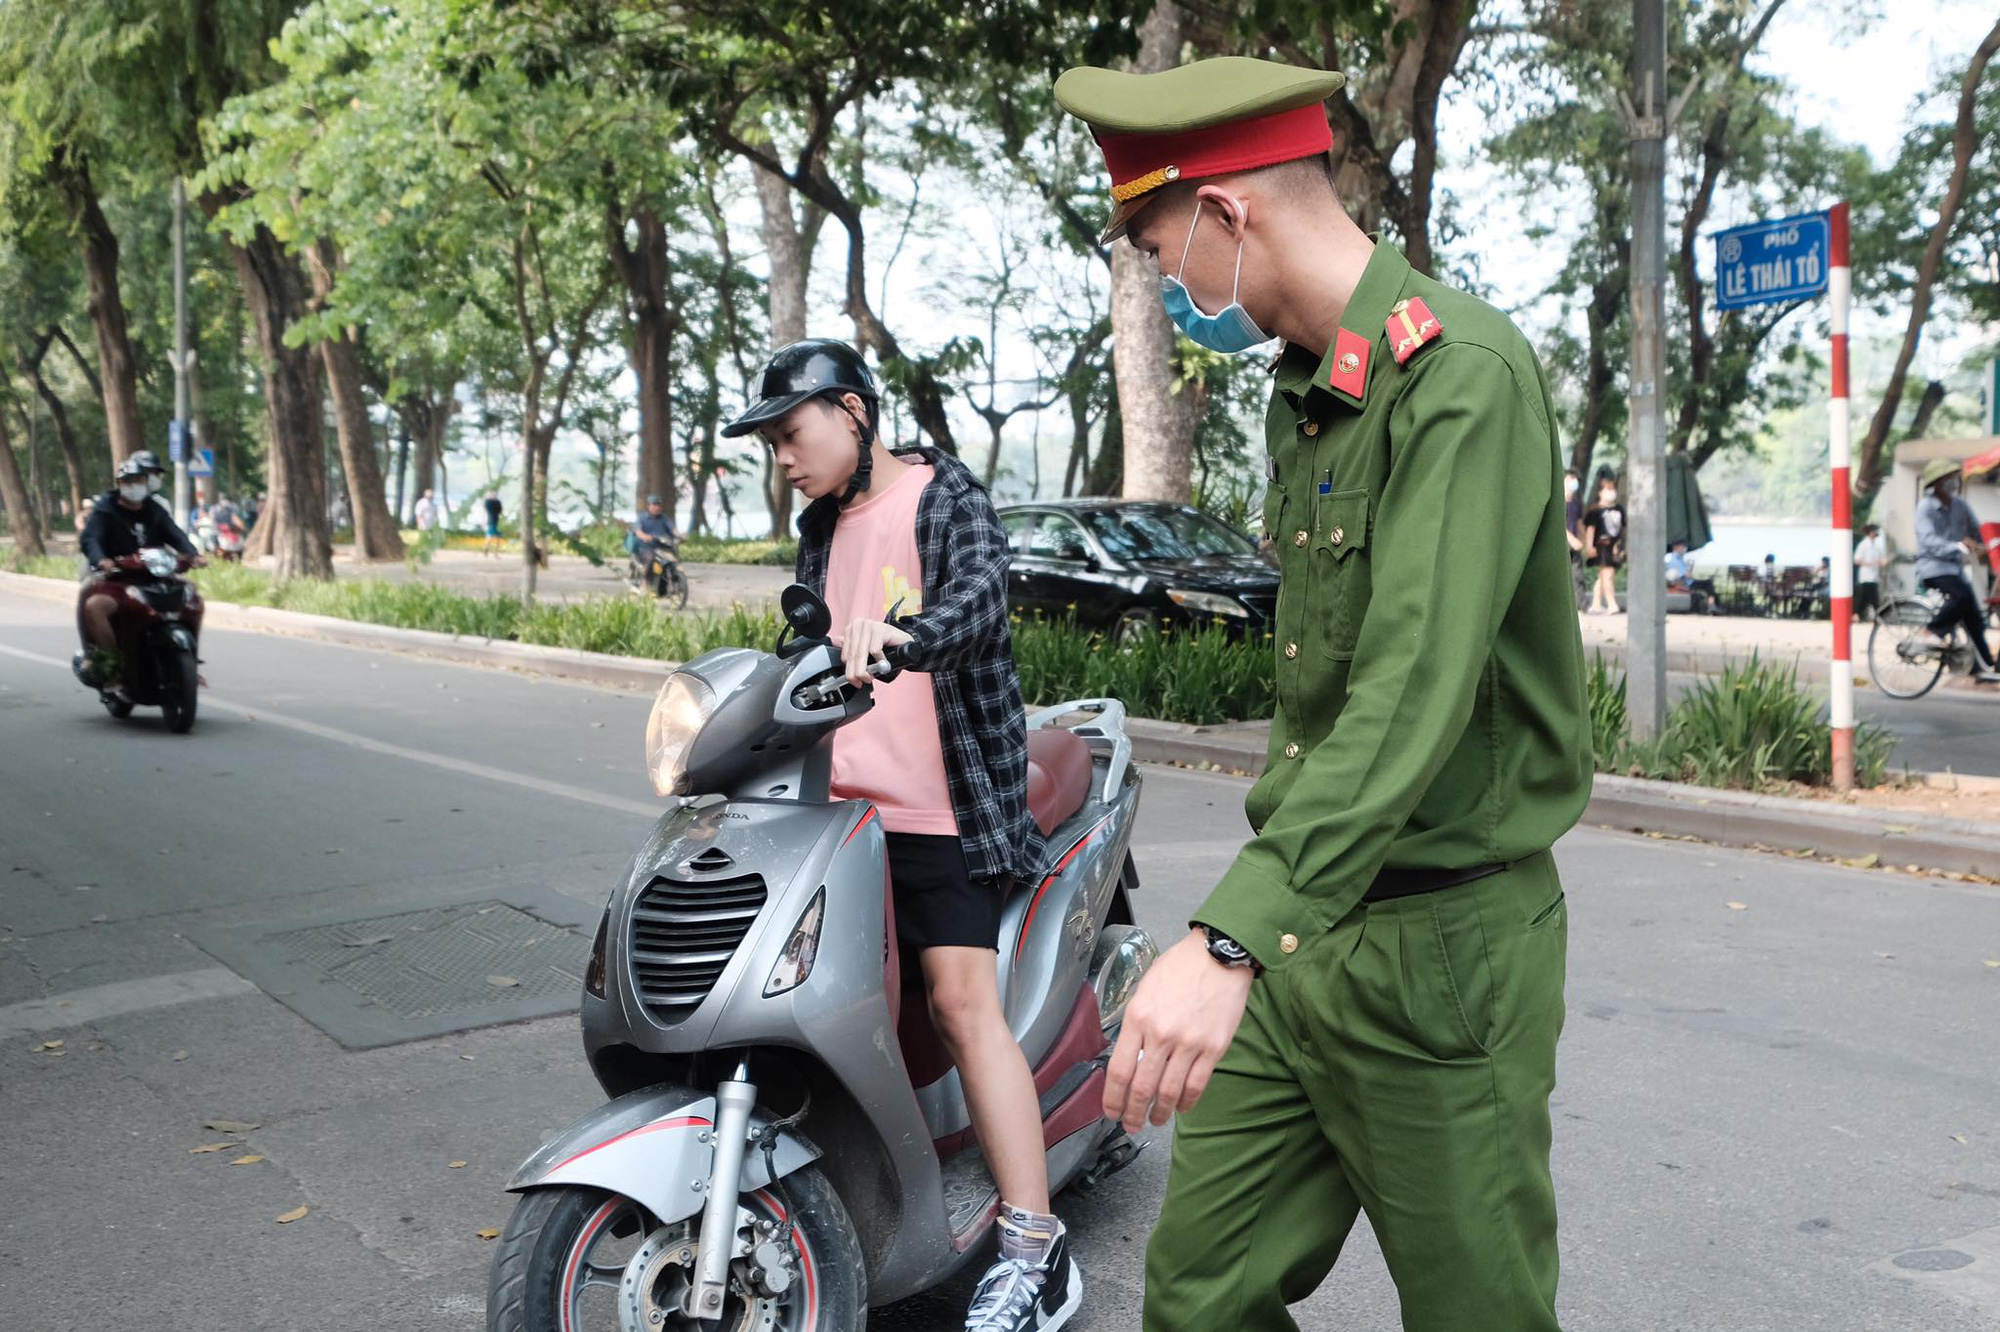 Hanoi police impose $129,700 fines on maskless people since beginning of May